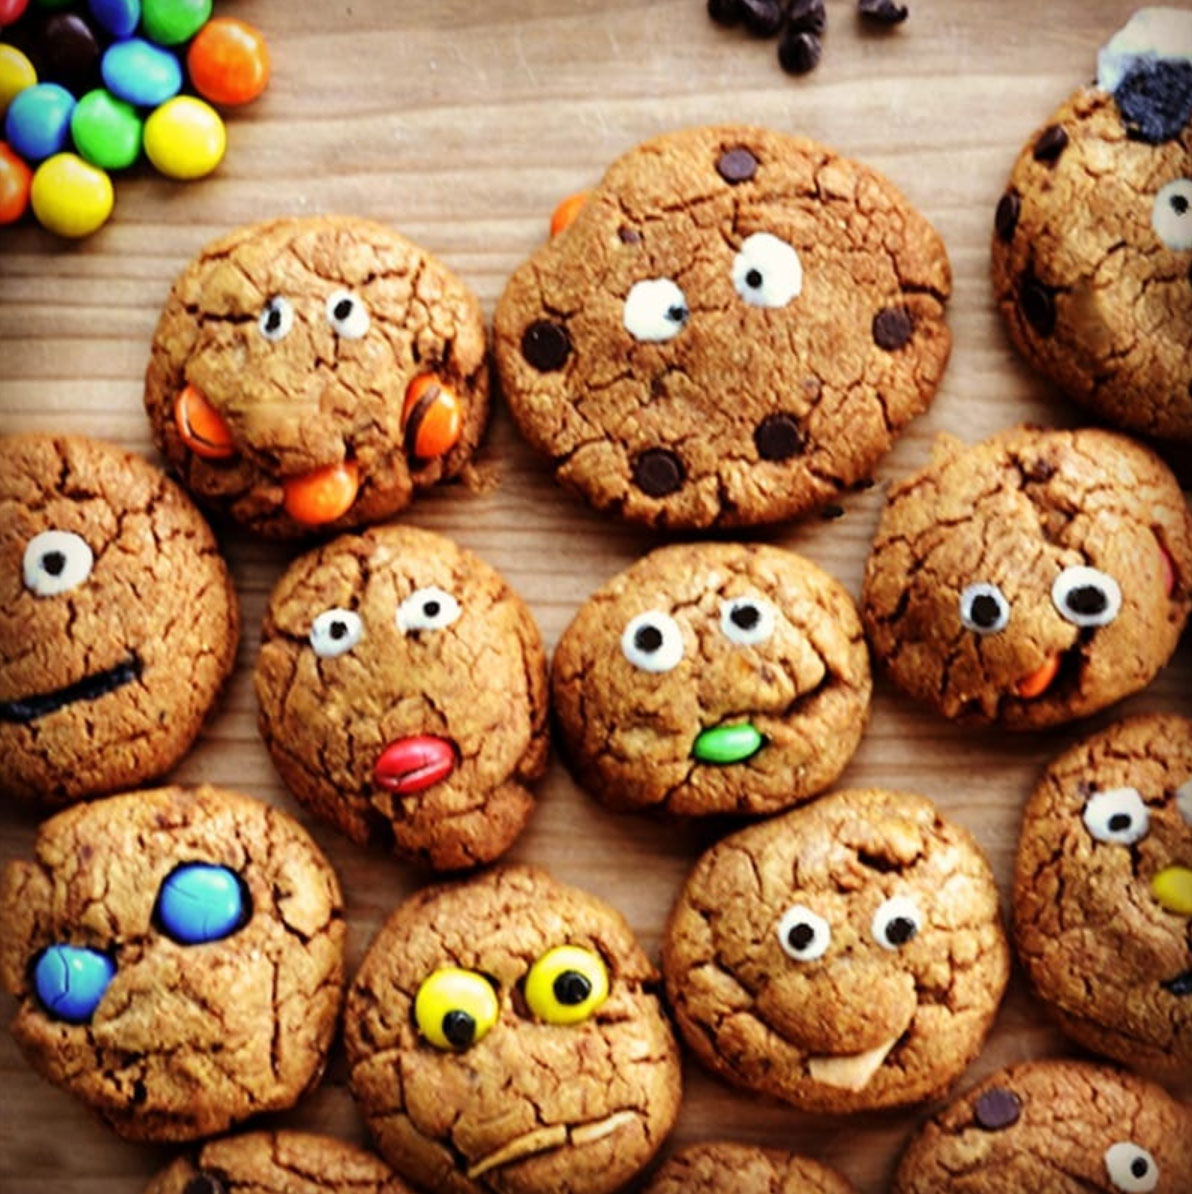 Scarily delicious monster cookies